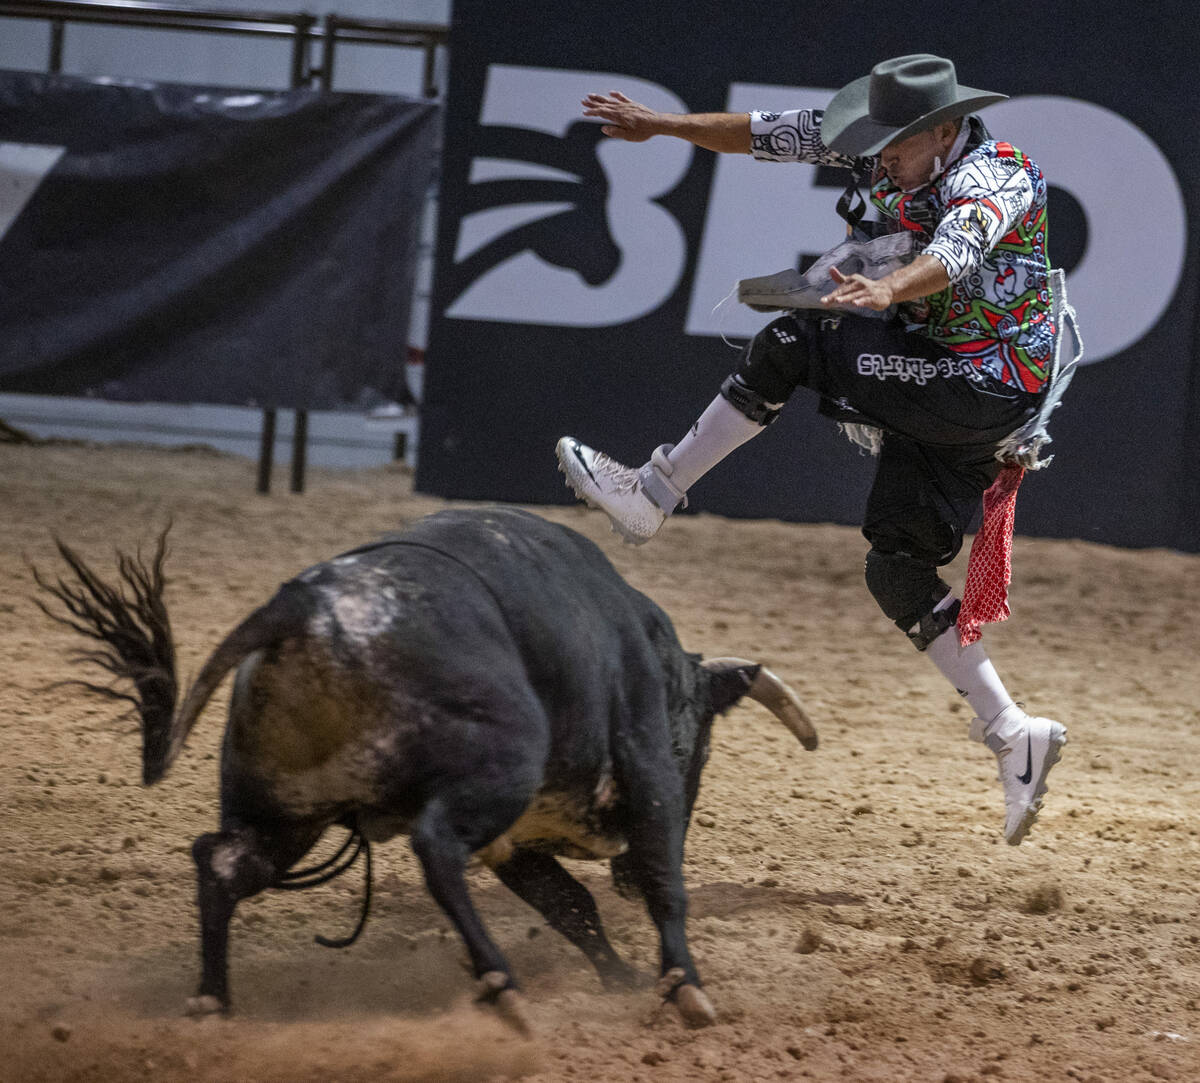 Competitor David Robles of Mexico leaps over a bull during the Bullfighters Only event at the W ...